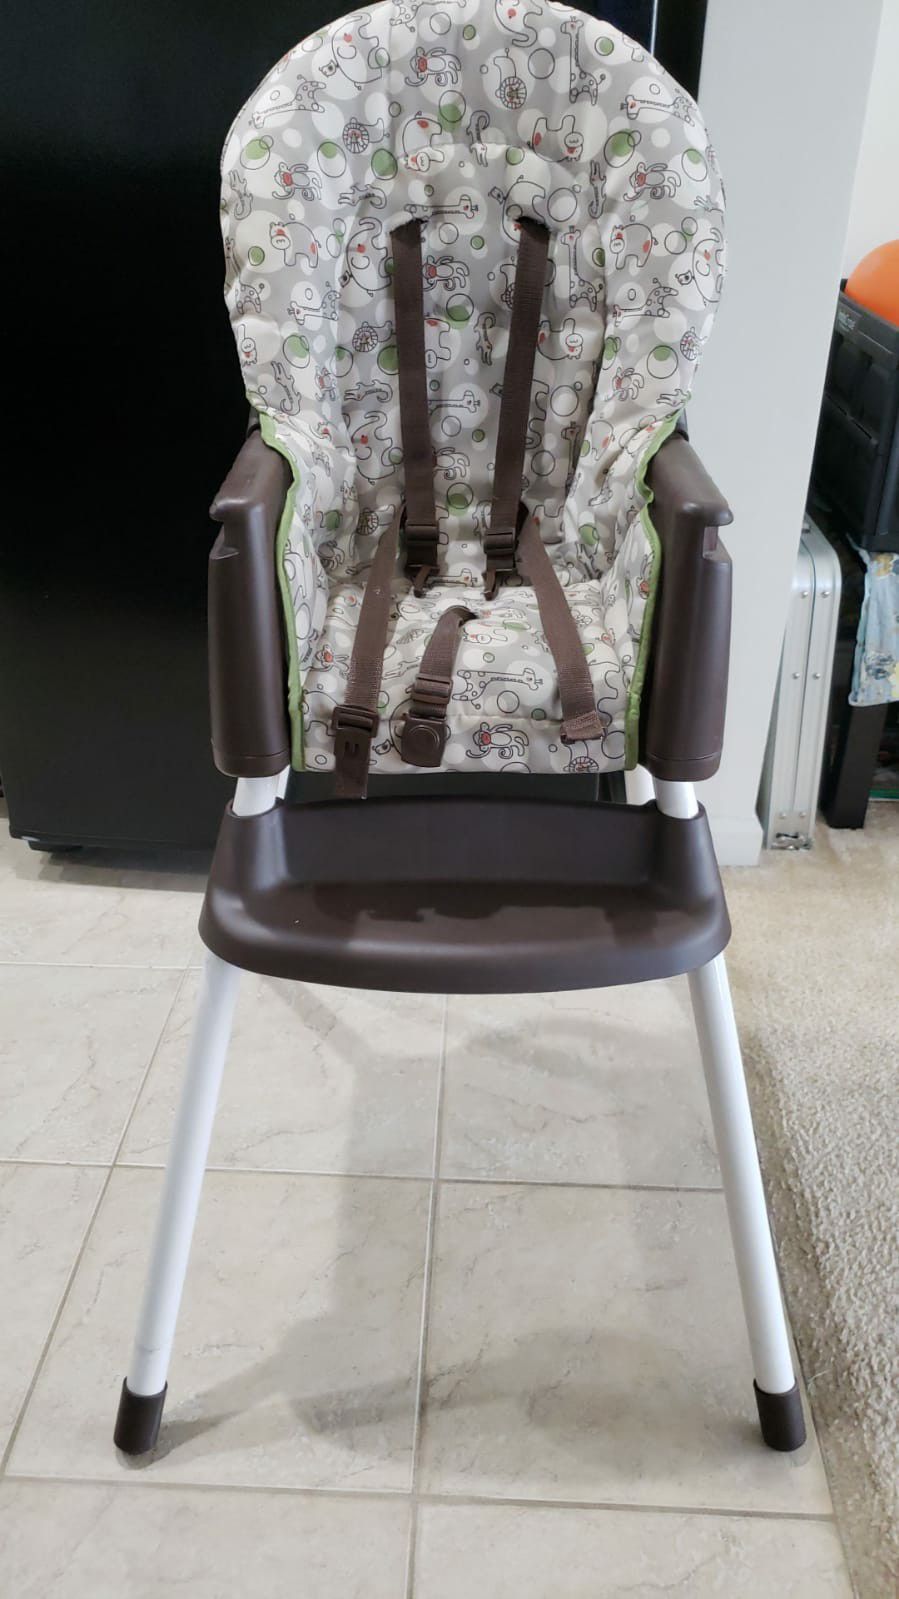 Graco high chair converts to booster seat